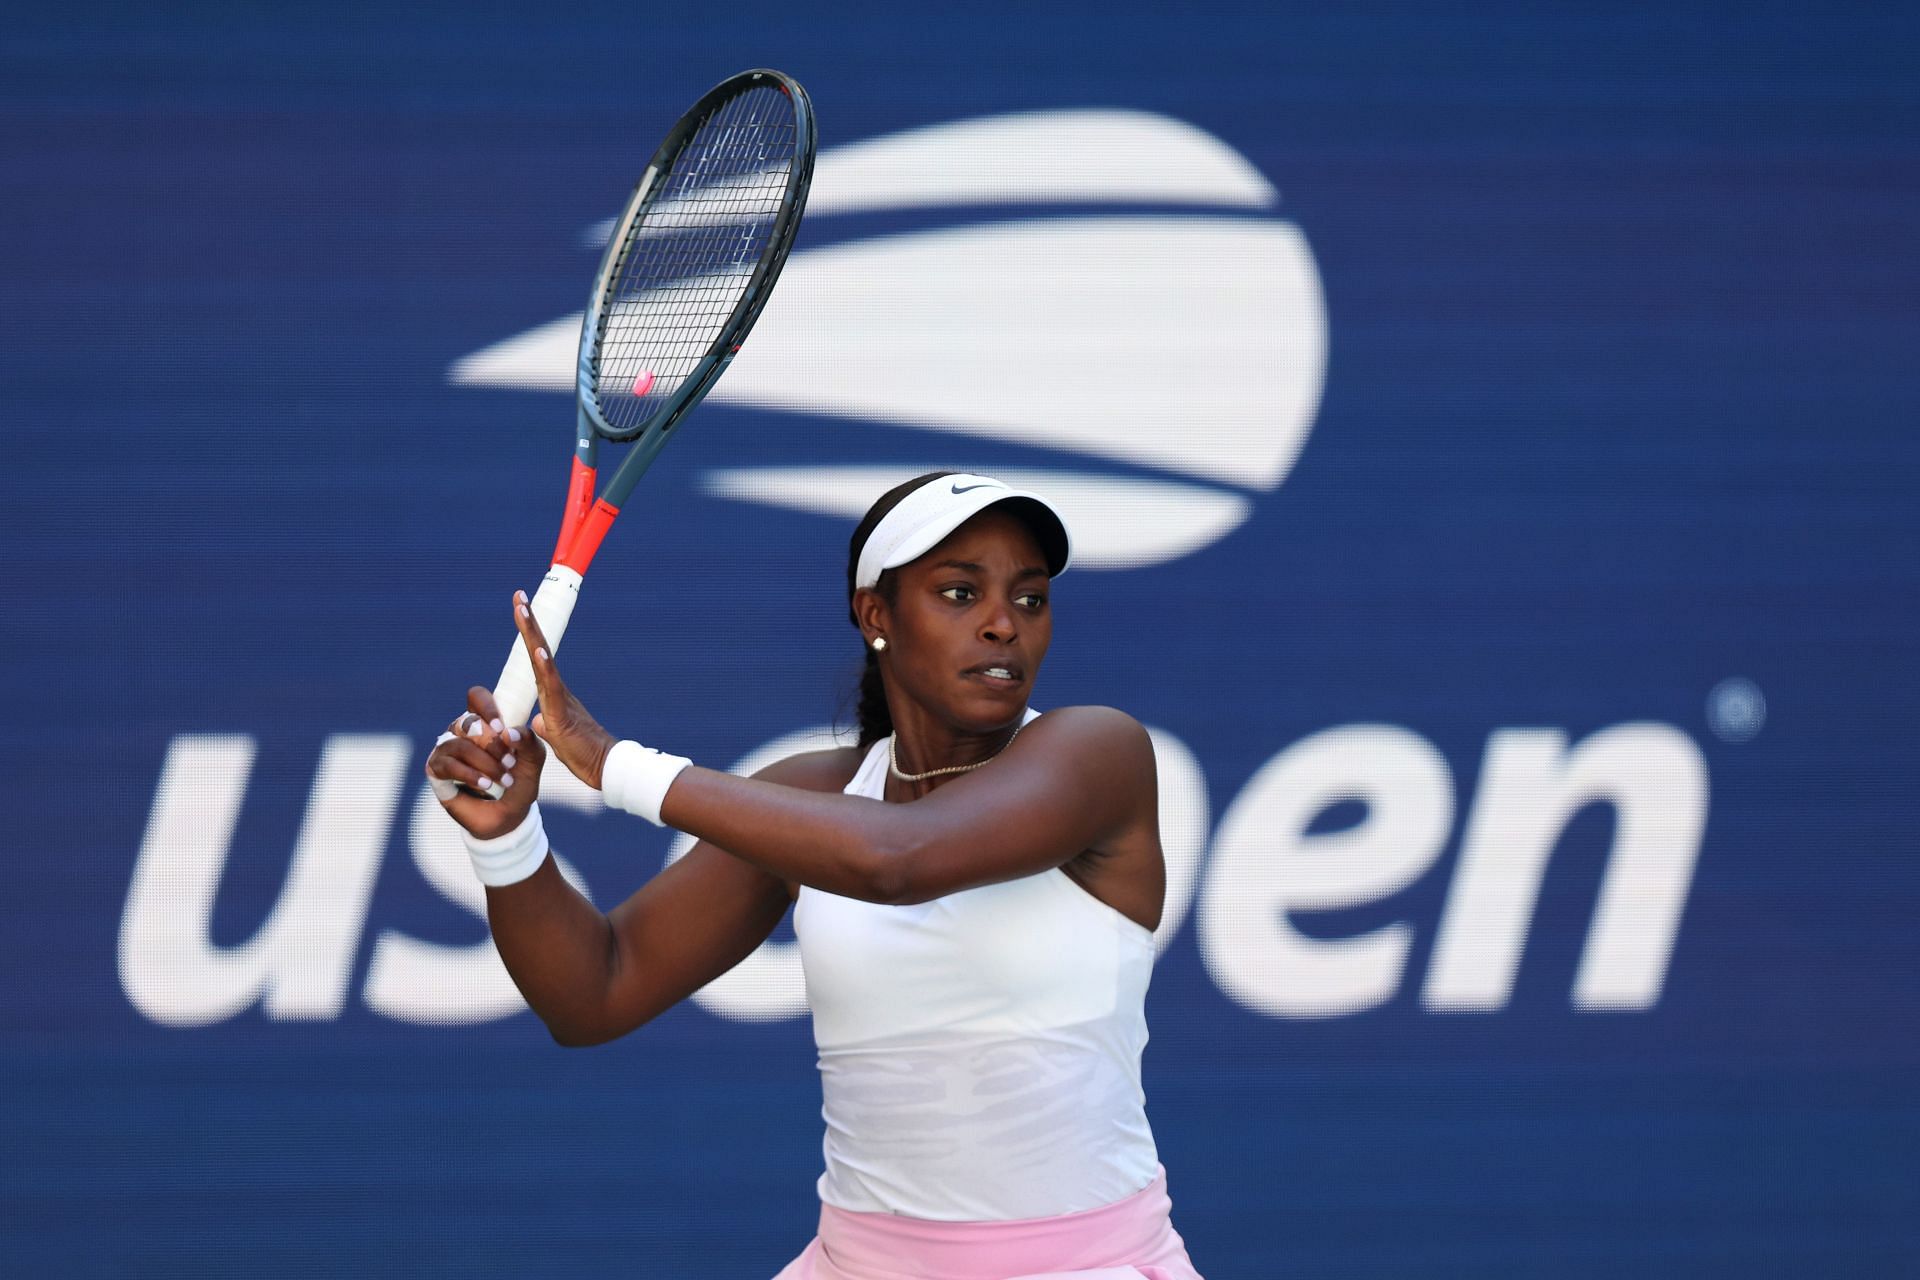 Sloane Stephens lost to Iga Swiatek in the second round of the 2022 US Open